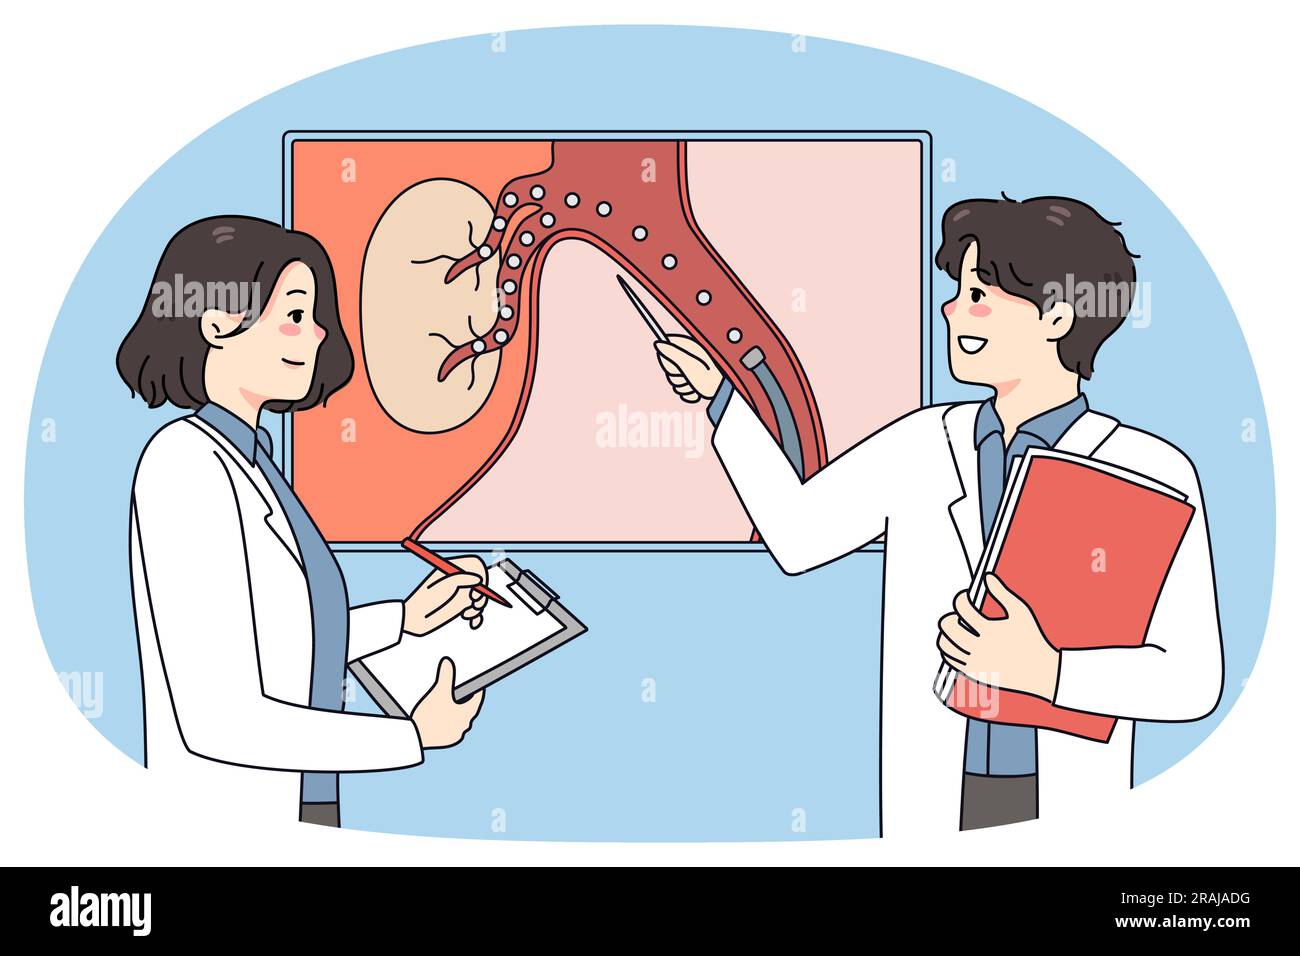 Doctors brainstorm talk about patient embolization. Medical colleague discuss diagnosis looking at organ picture. Hepatology and liver problem. Vector illustration. Stock Vector